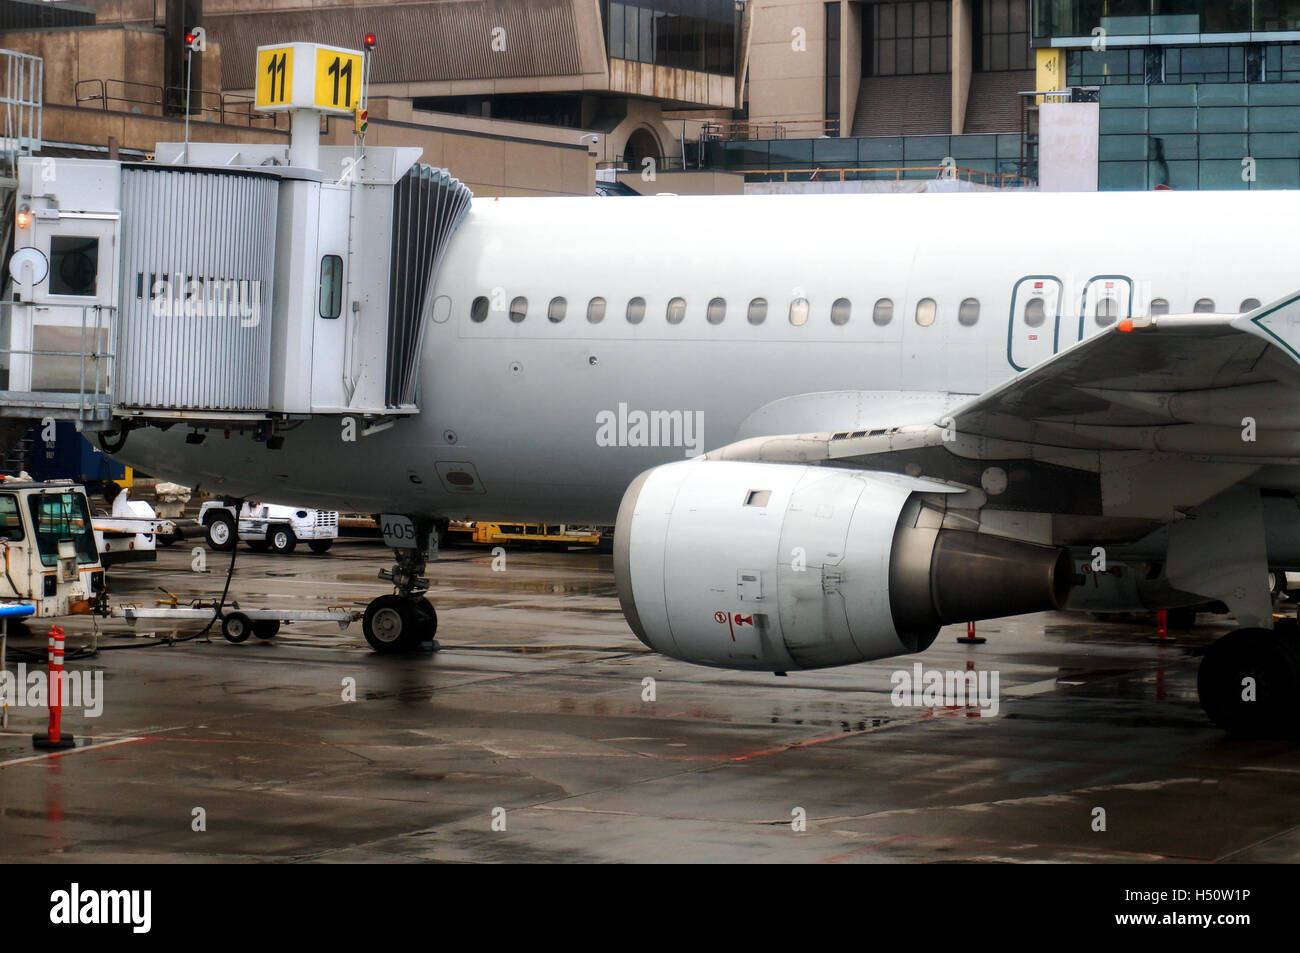 An airplane connected to a jet bridge being serviced at an airport before its next scheduled flight. Stock Photo